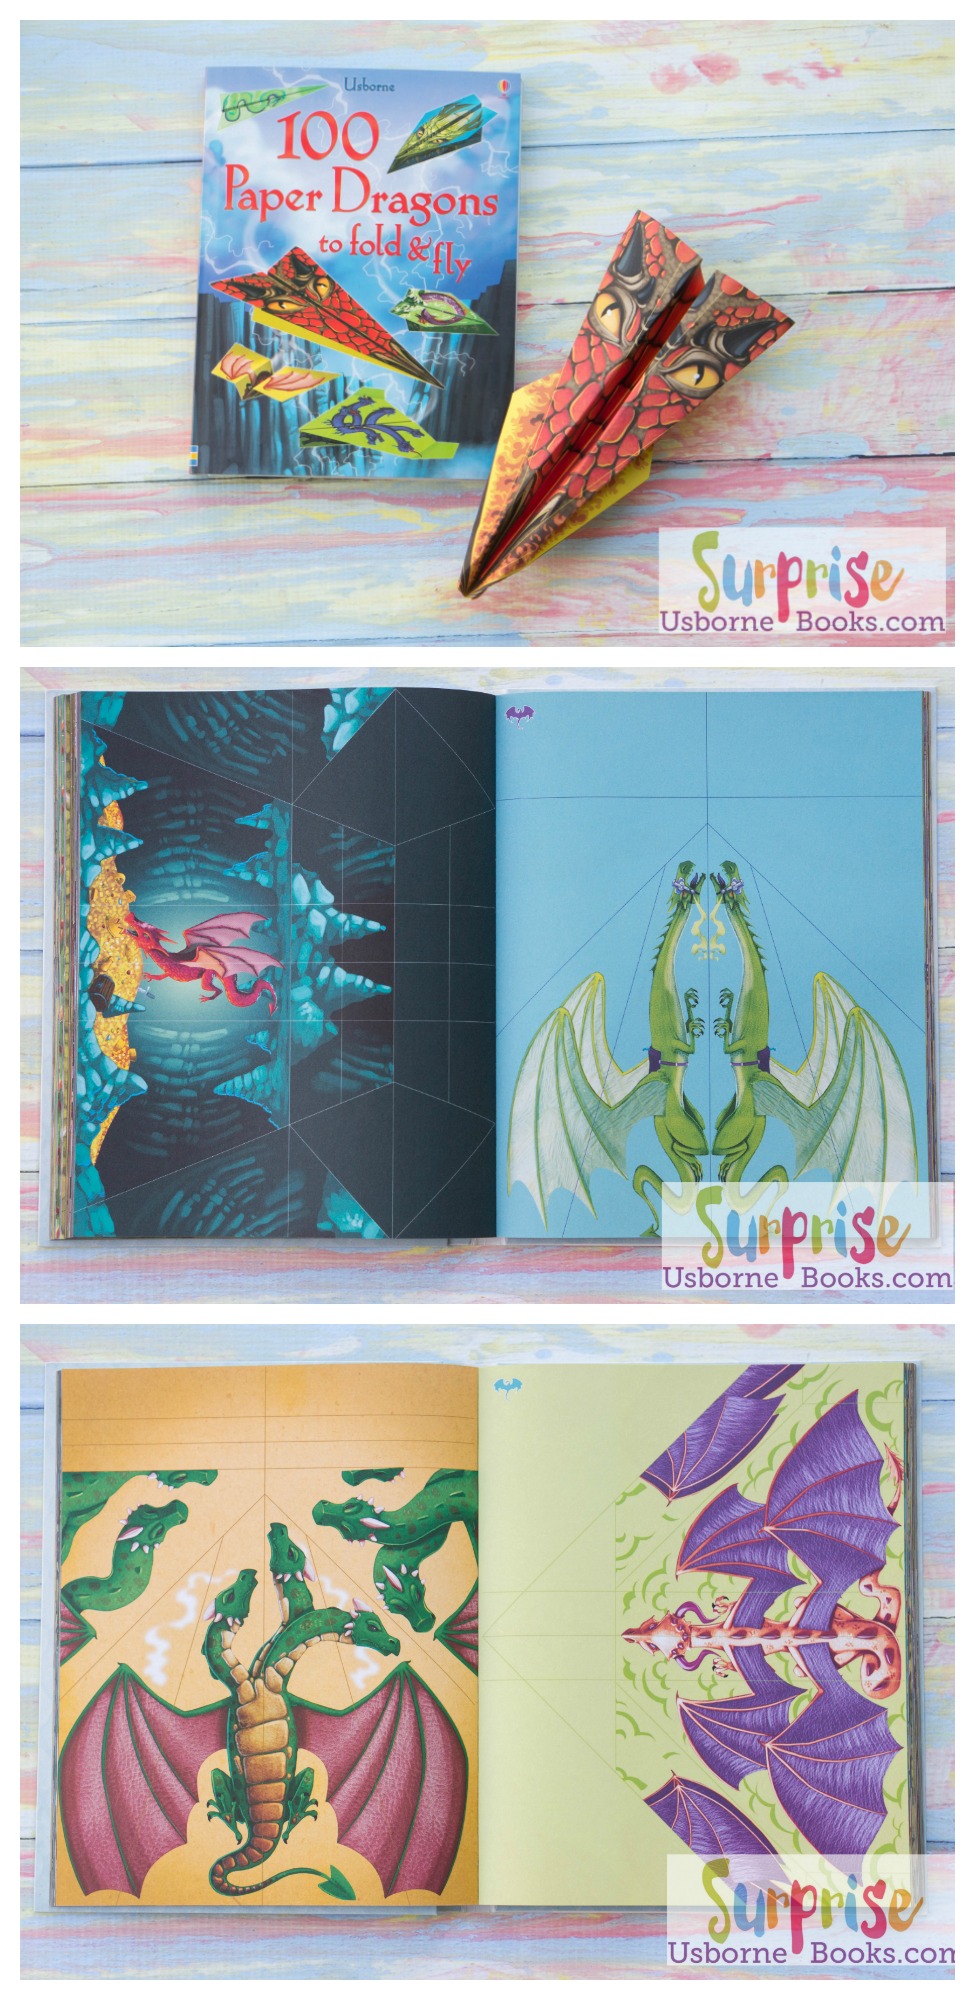 100 Paper Dragons to Fold & Fly - Surprise Usborne Books